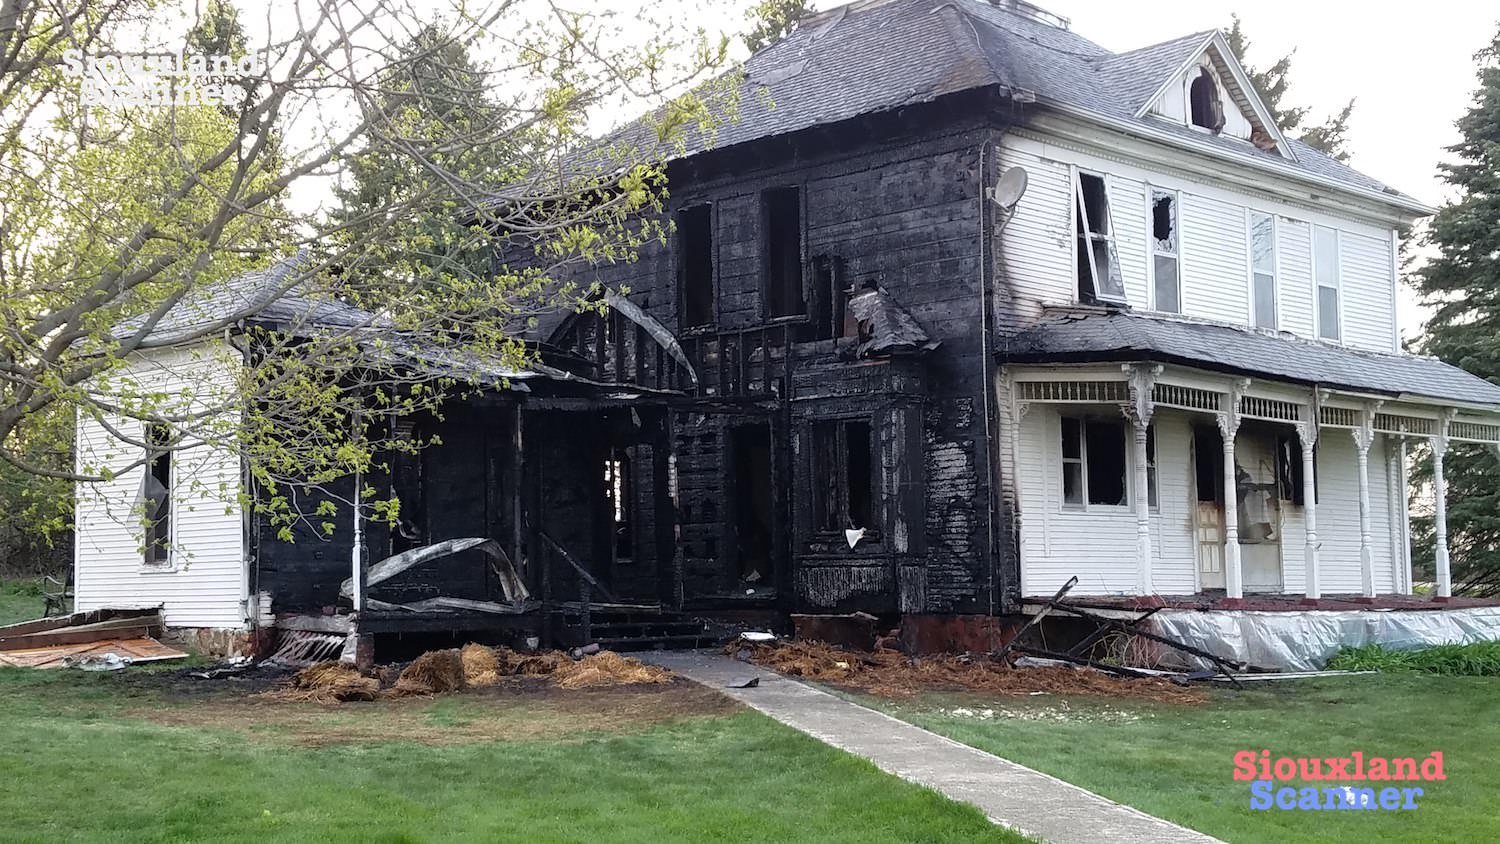 Rural Plymouth County Farmhouse a total loss after Sunday Evening Fire